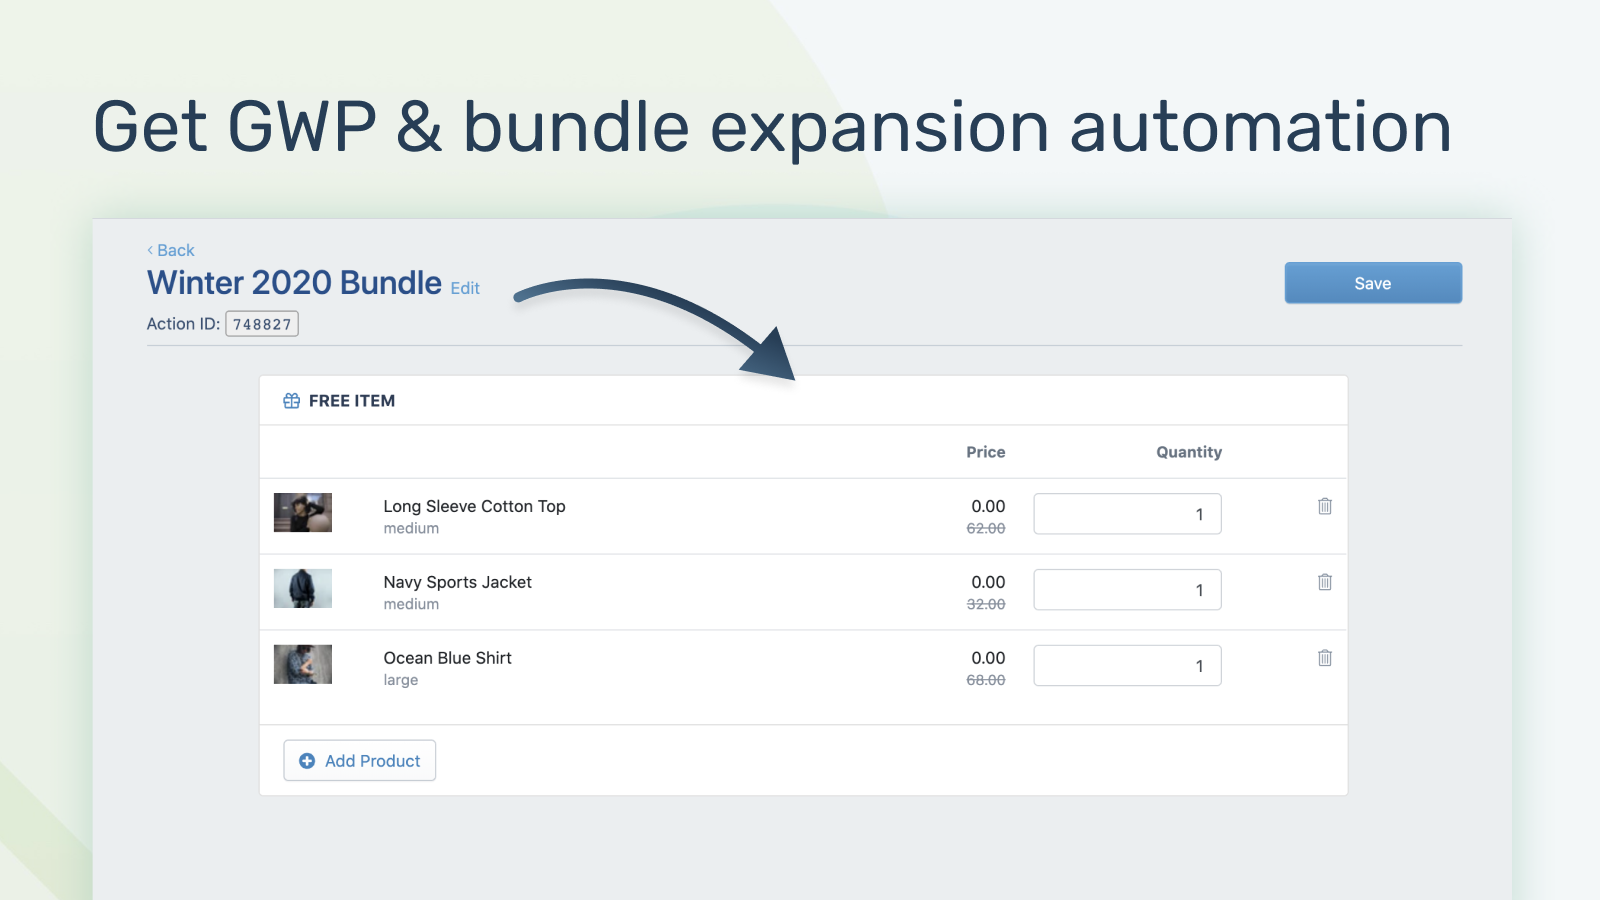 Add promos or expand bundles with order automation